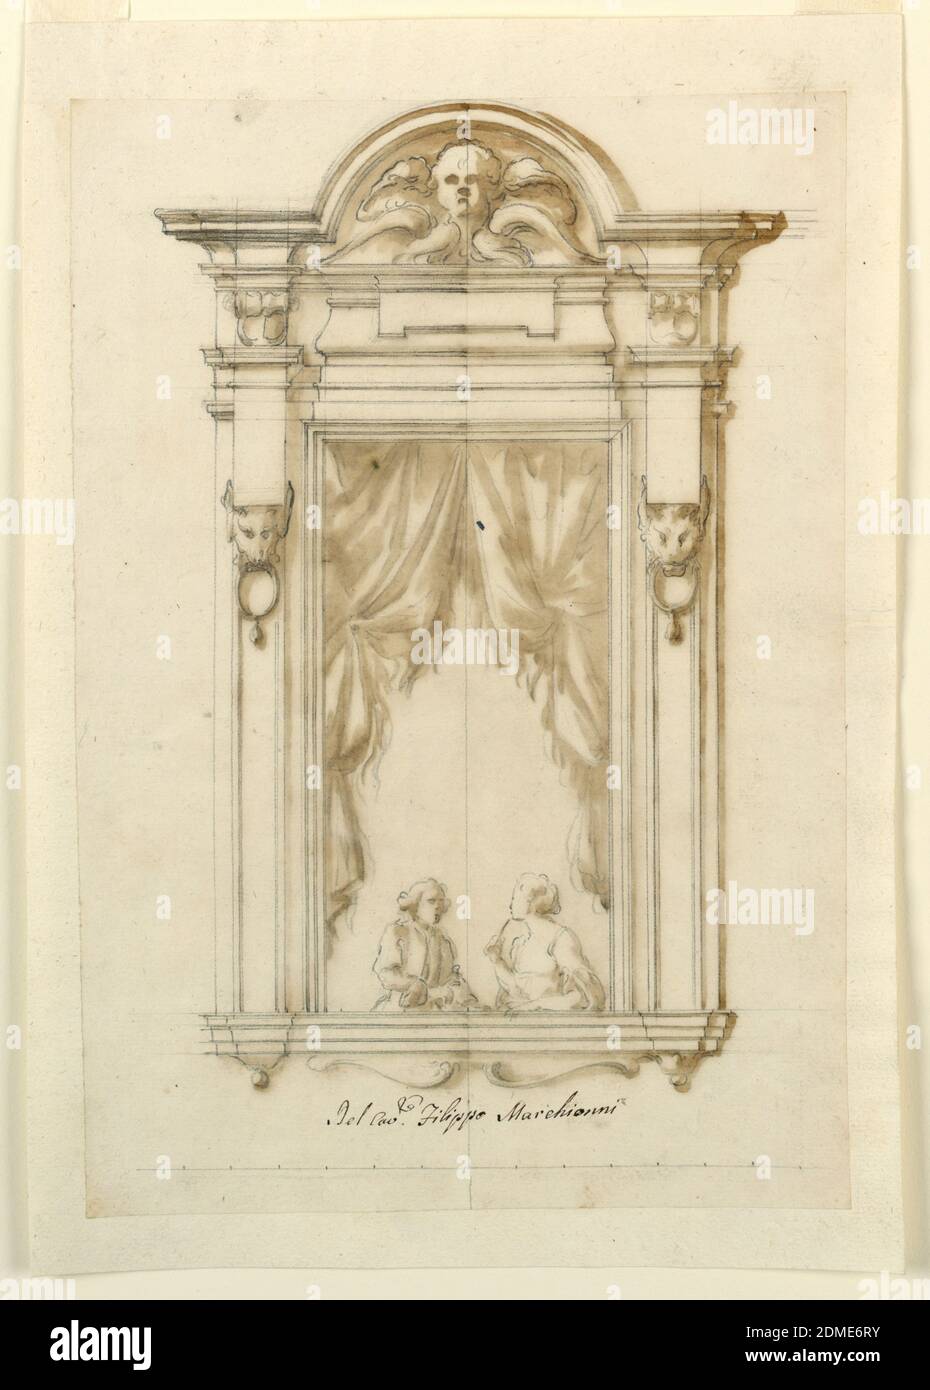 Design for Elevation of a Window Case, Filippo Marchionni, Italian, 1732–1805, Black chalk, brush and brown watercolor on laid paper, Pilasters are projecting laterally consisting of slopes, wolf heads carrying rings with tassels in their mouths and of top parts of regular pilasters. A half semi-circular pediment is on top of the central part of the entablature showing a cherub in the field. Two wings of curtains and half figures of a man and a woman conversing are showing in the window. Scale at the bottom., Italy, ca. 1750, architecture, Drawing Stock Photo